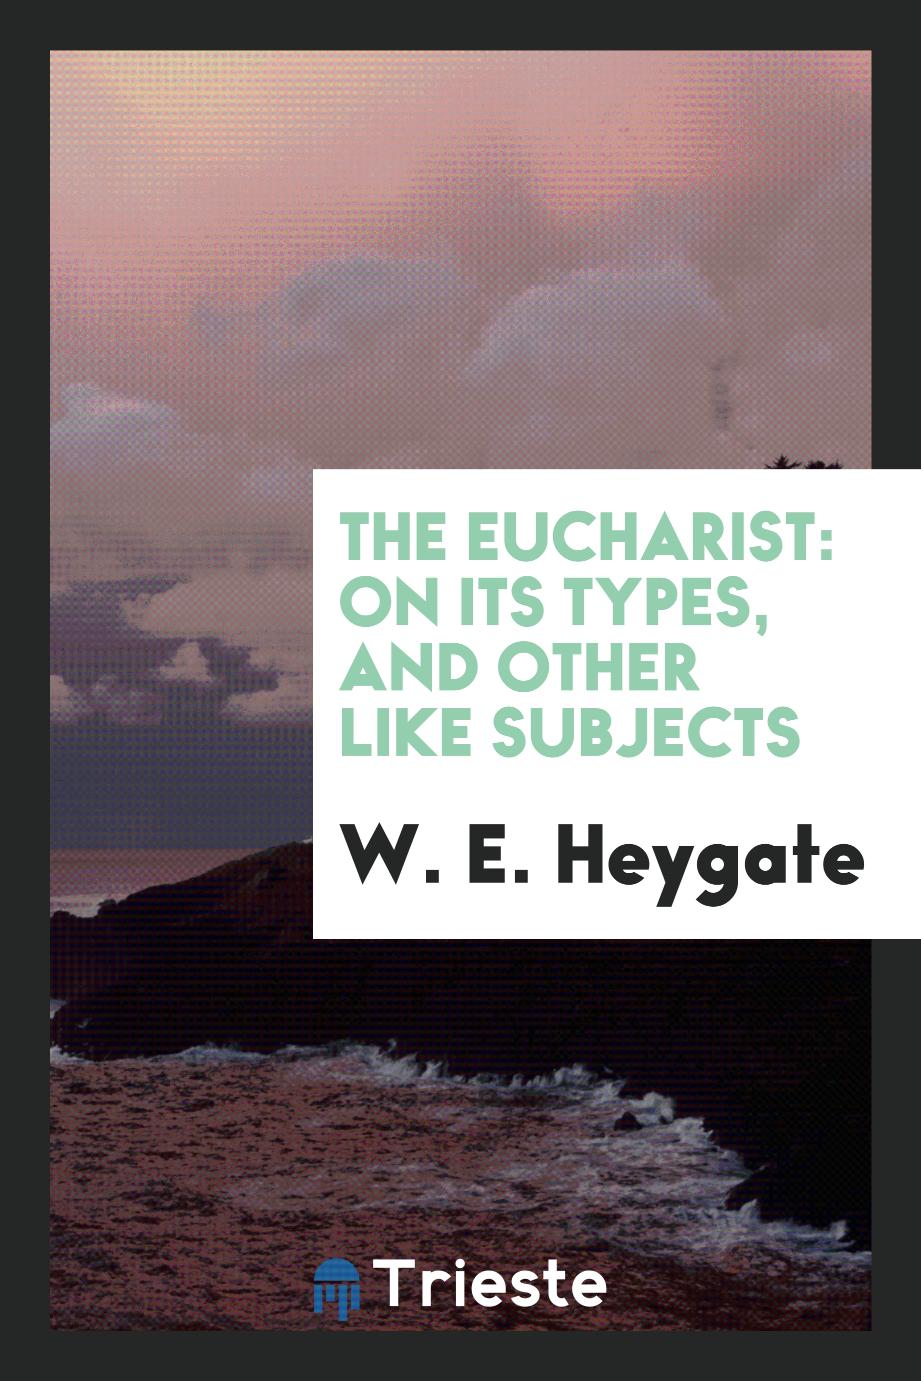 The Eucharist: On Its Types, and Other Like Subjects